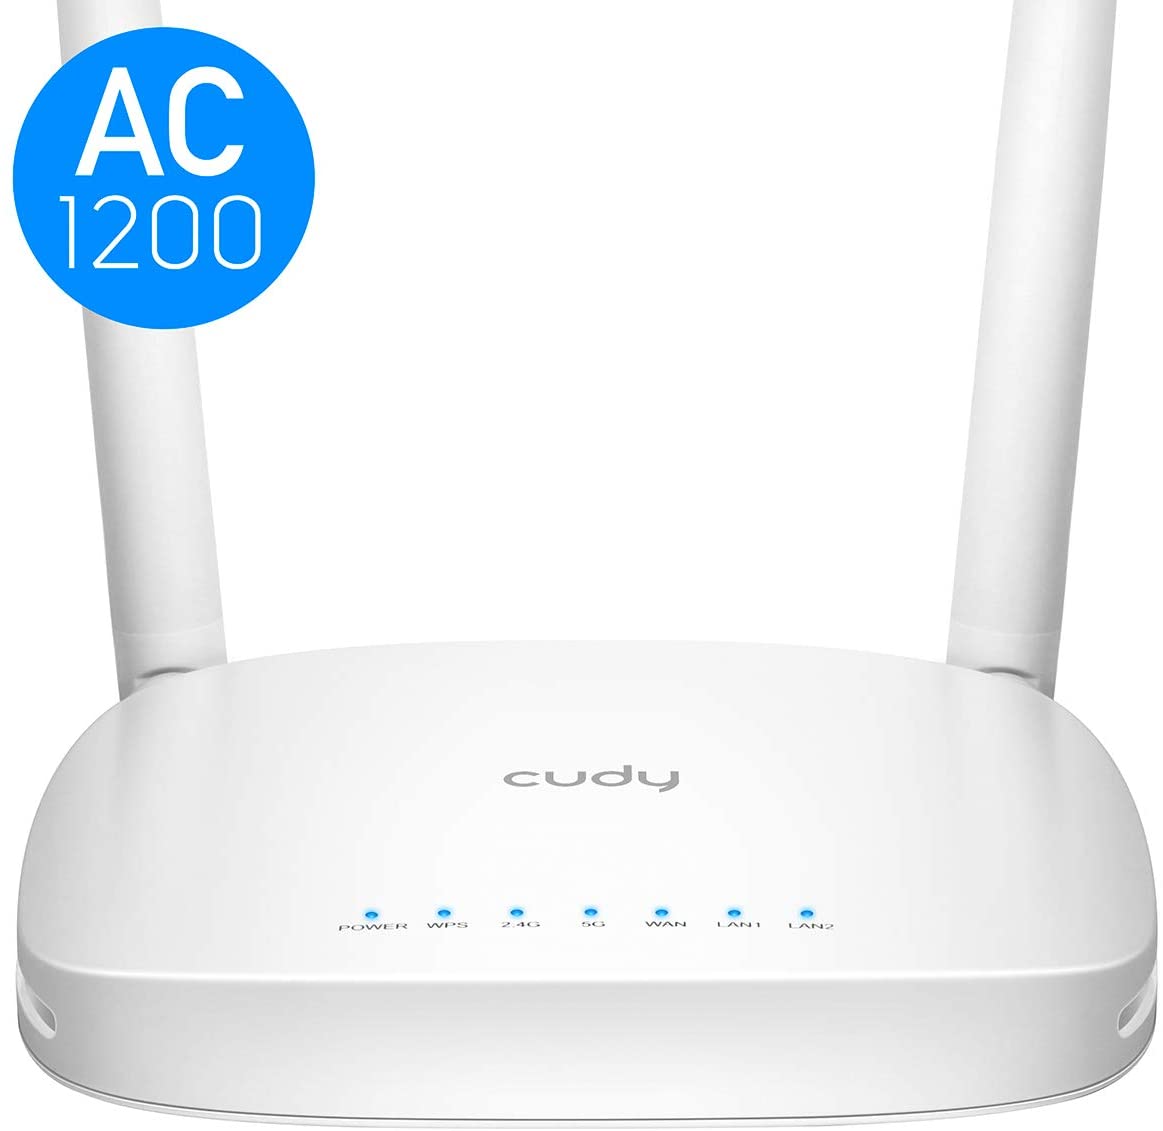 Cudy Dual Band WLAN AC + N Router for cable DSL glass fiber modem connection